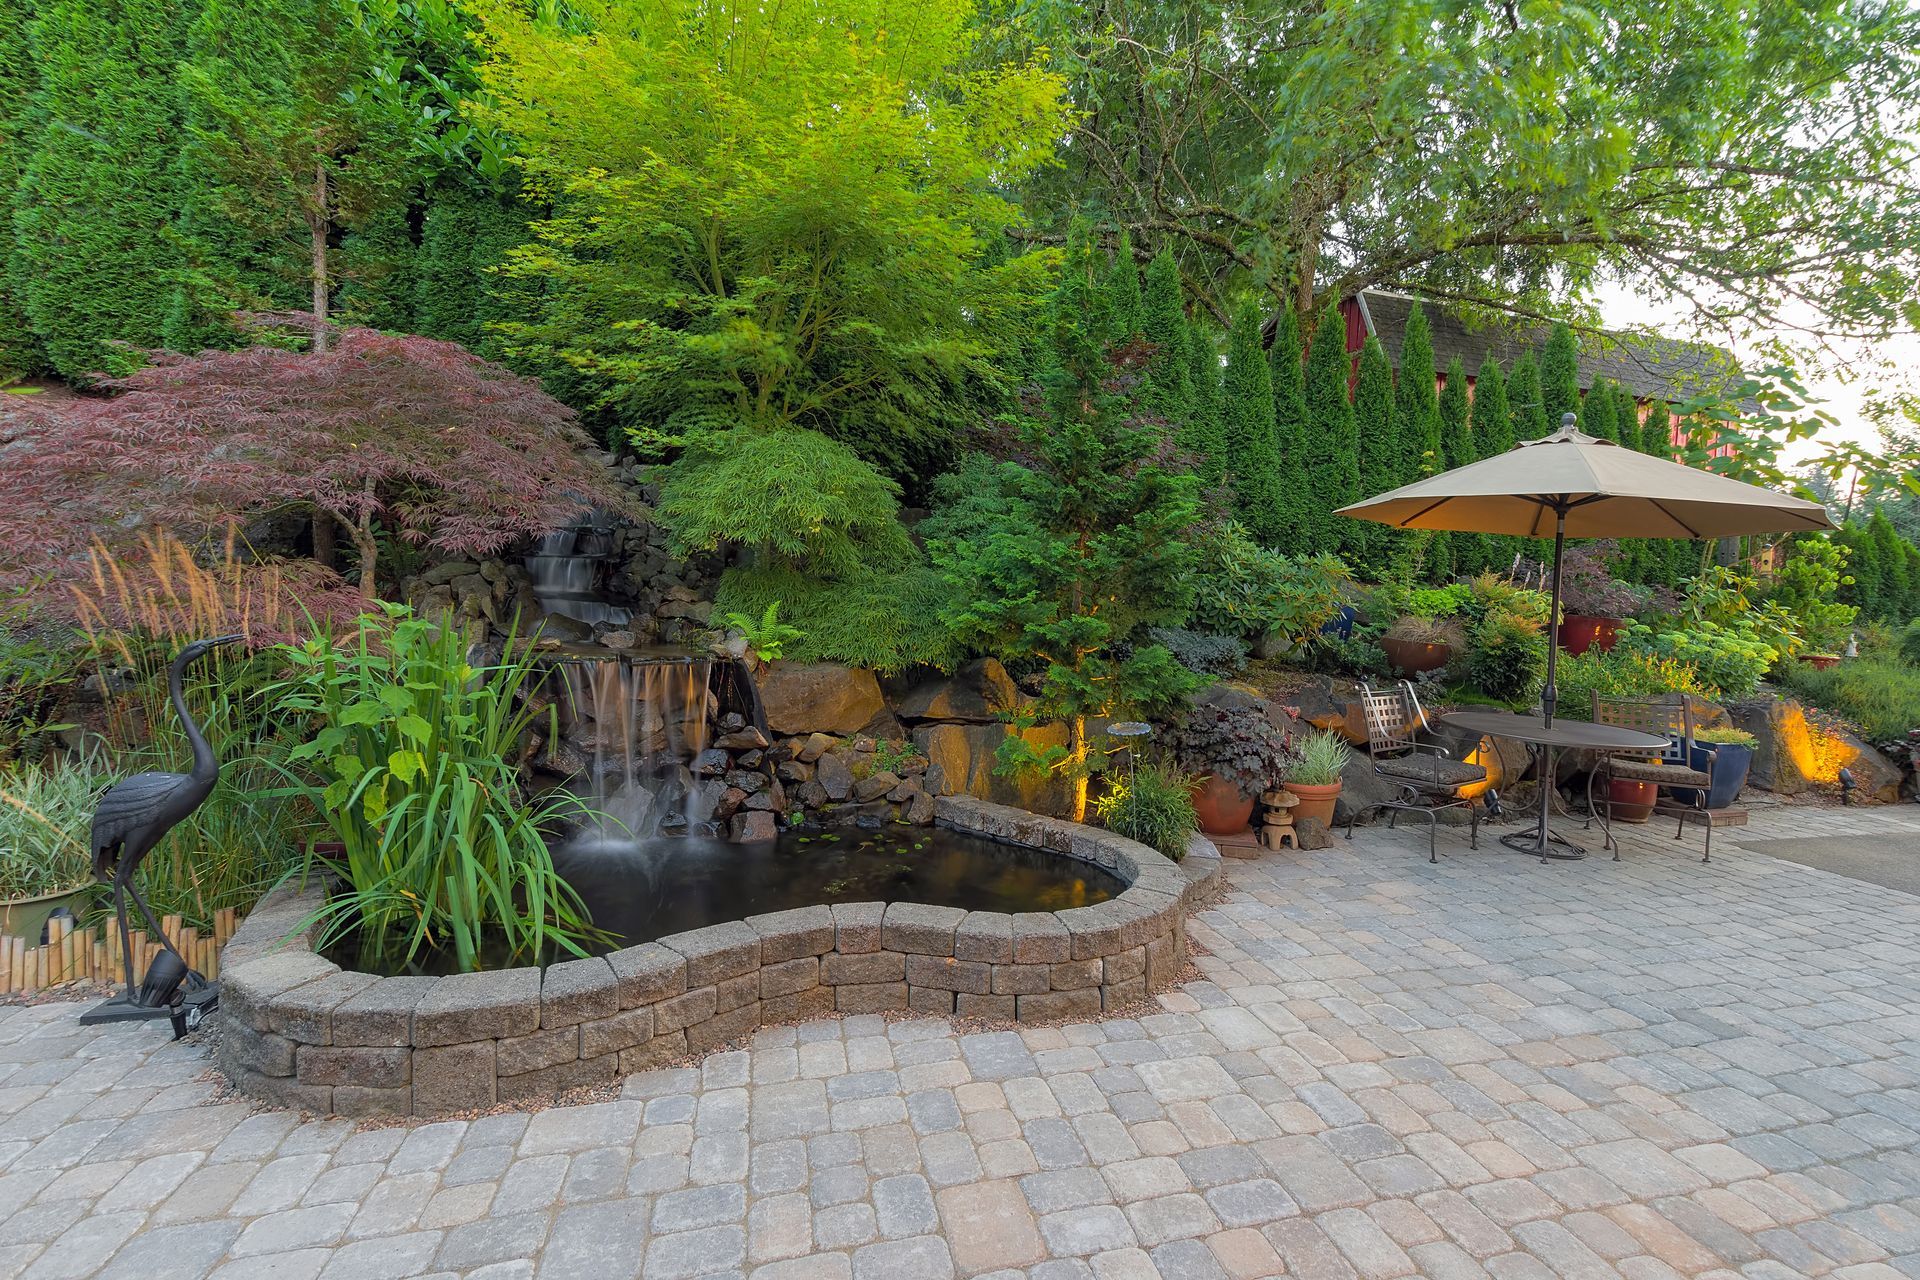 Discover the transformative advantages of professional landscaping with Skagit Branches. From expert